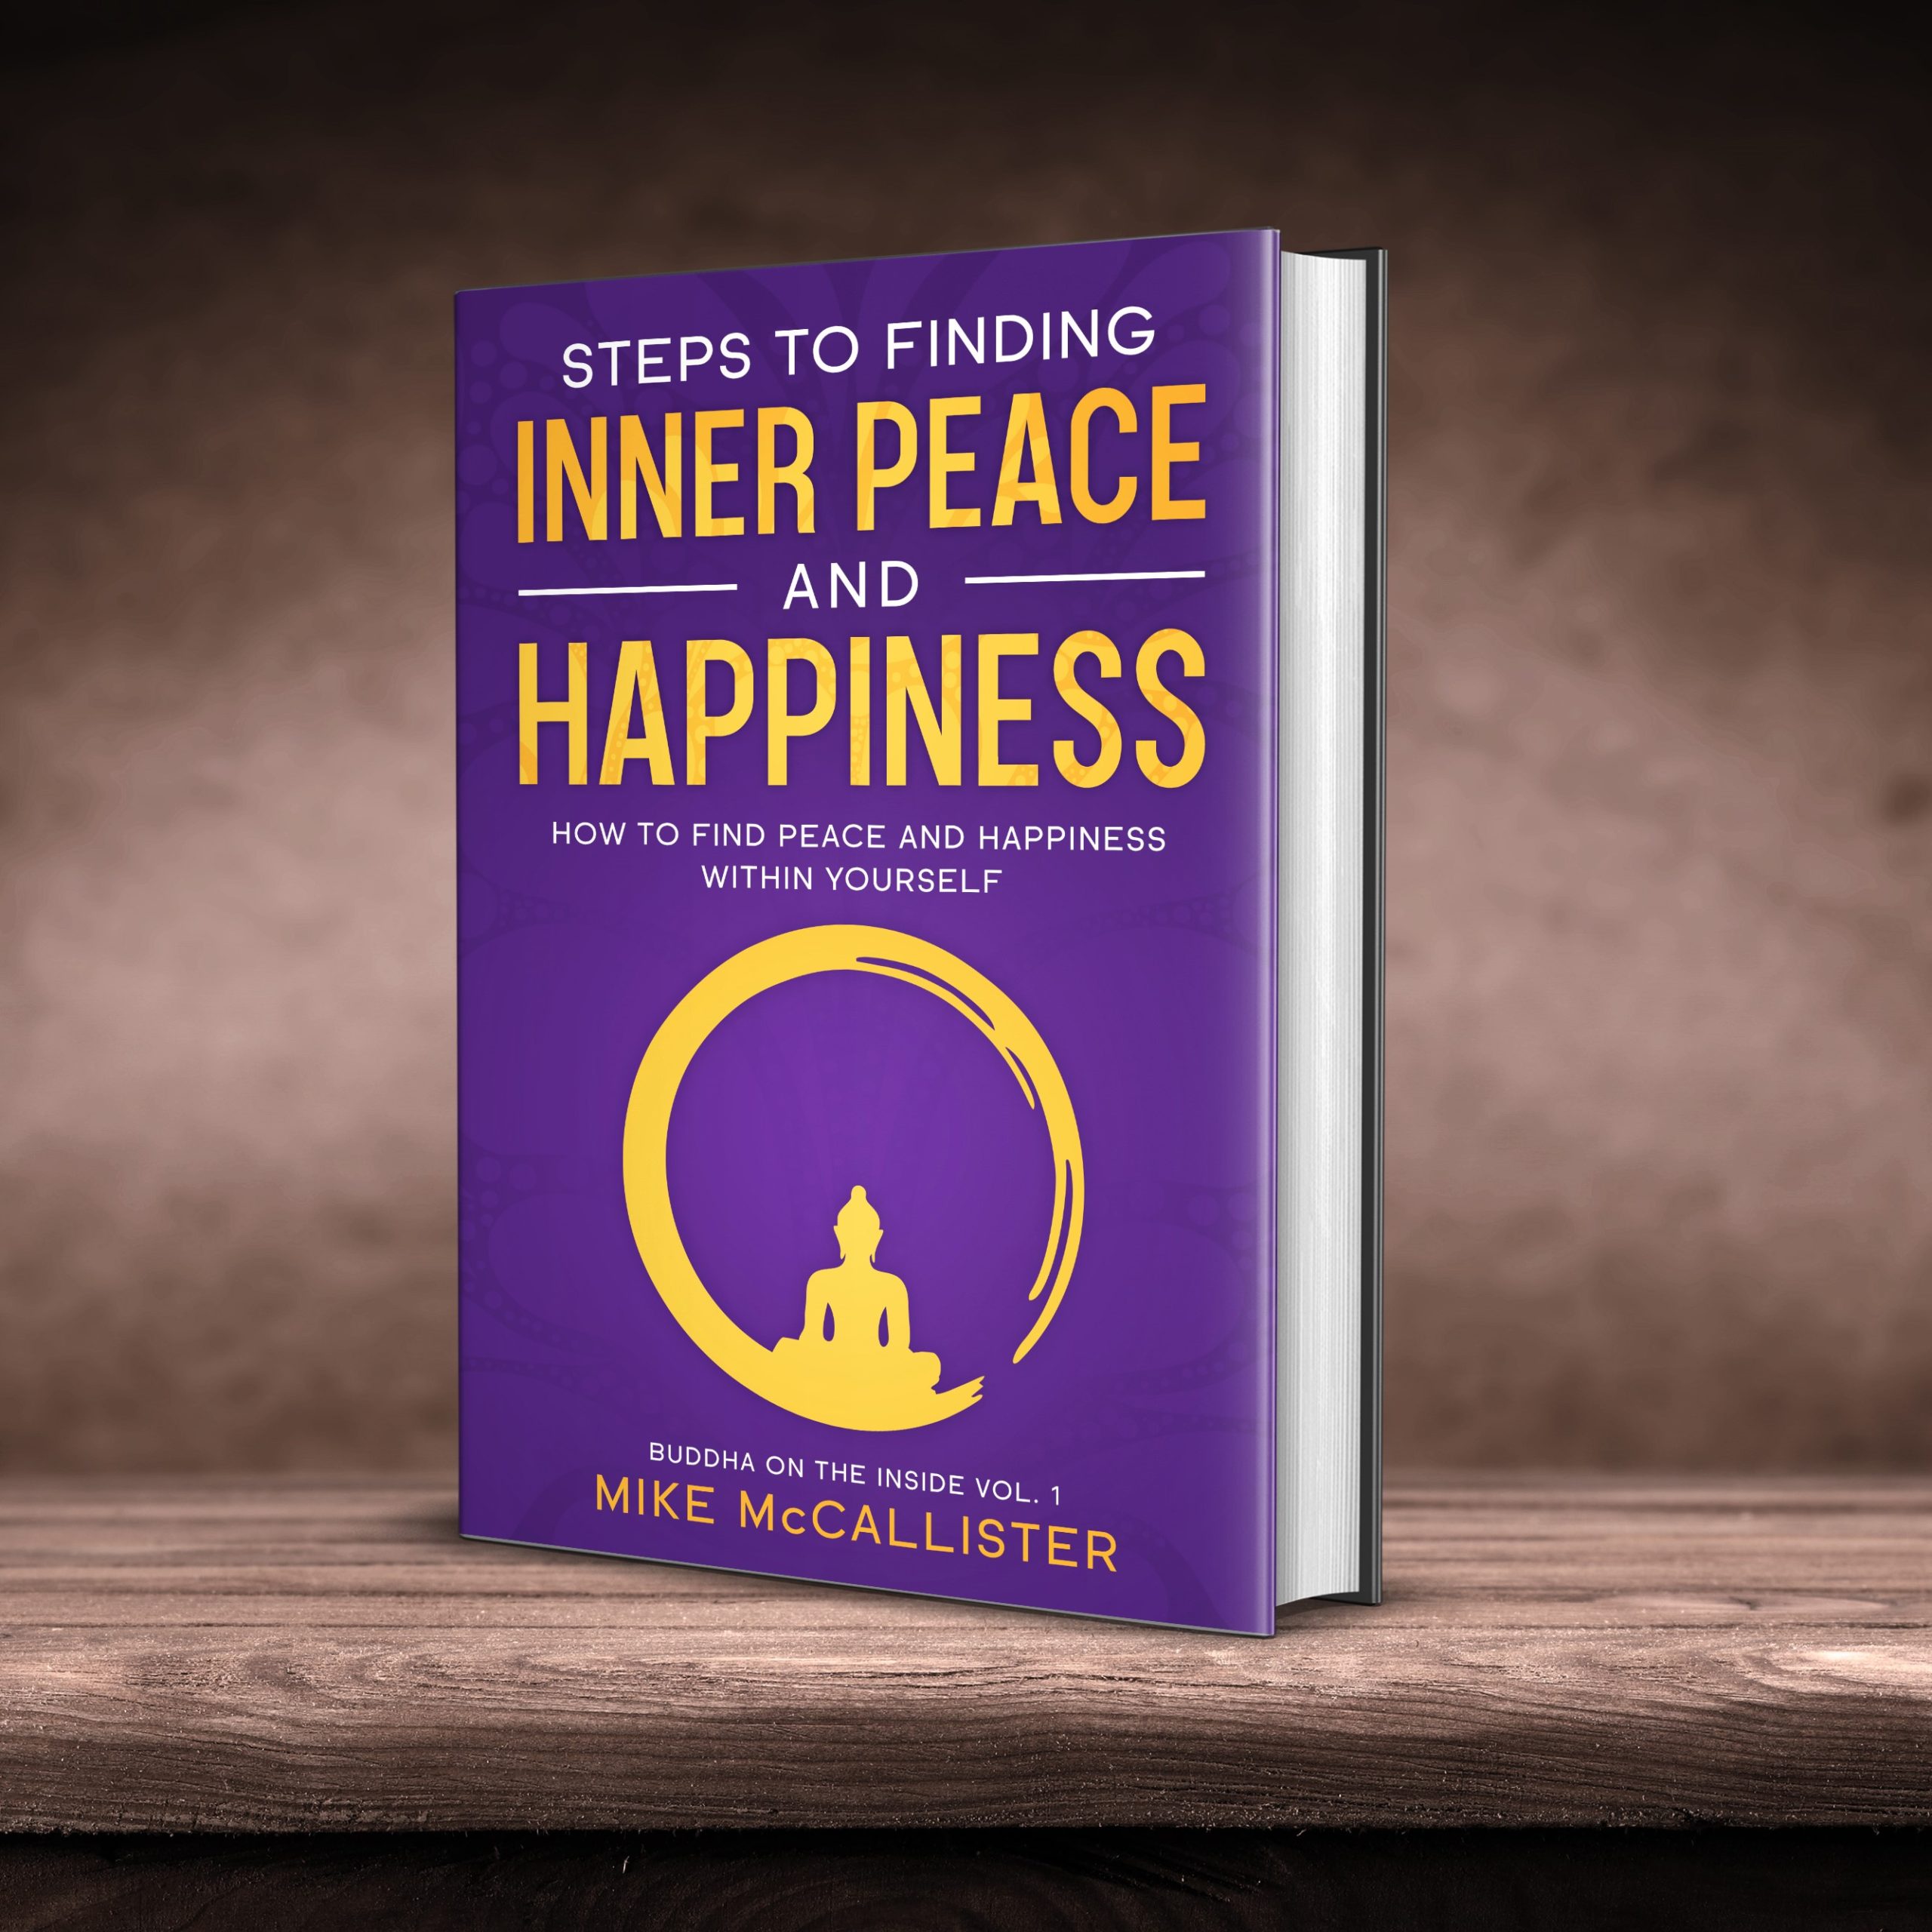 Steps to Finding Inner Peace and Happiness: How to Find Peace and Happiness Within Yourself (Buddha on the Inside Book 1)